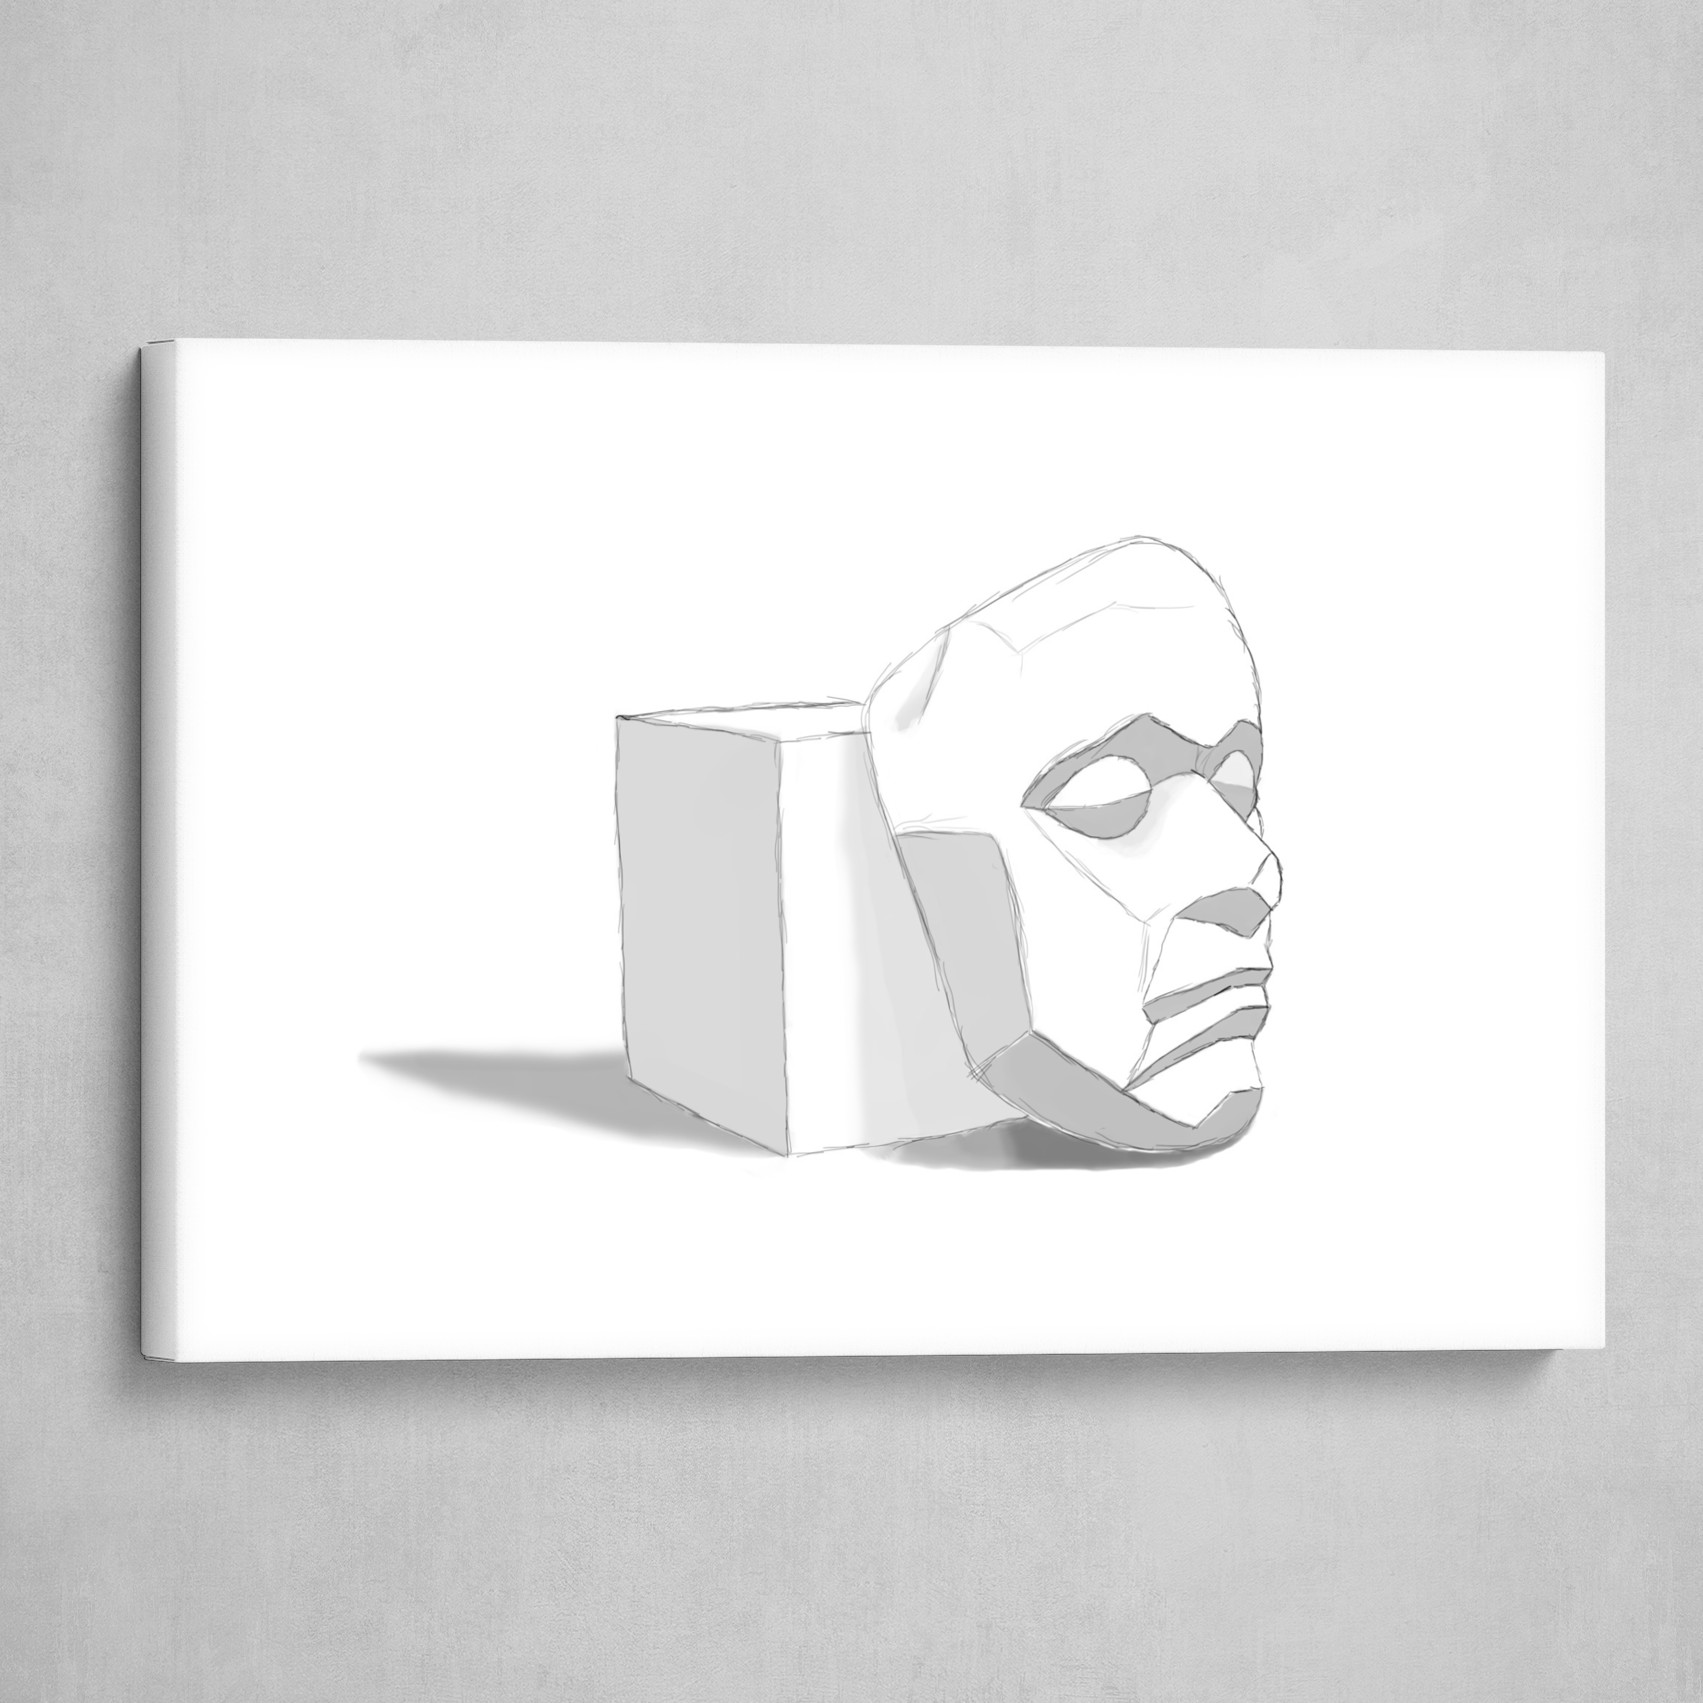 Simple cube and face